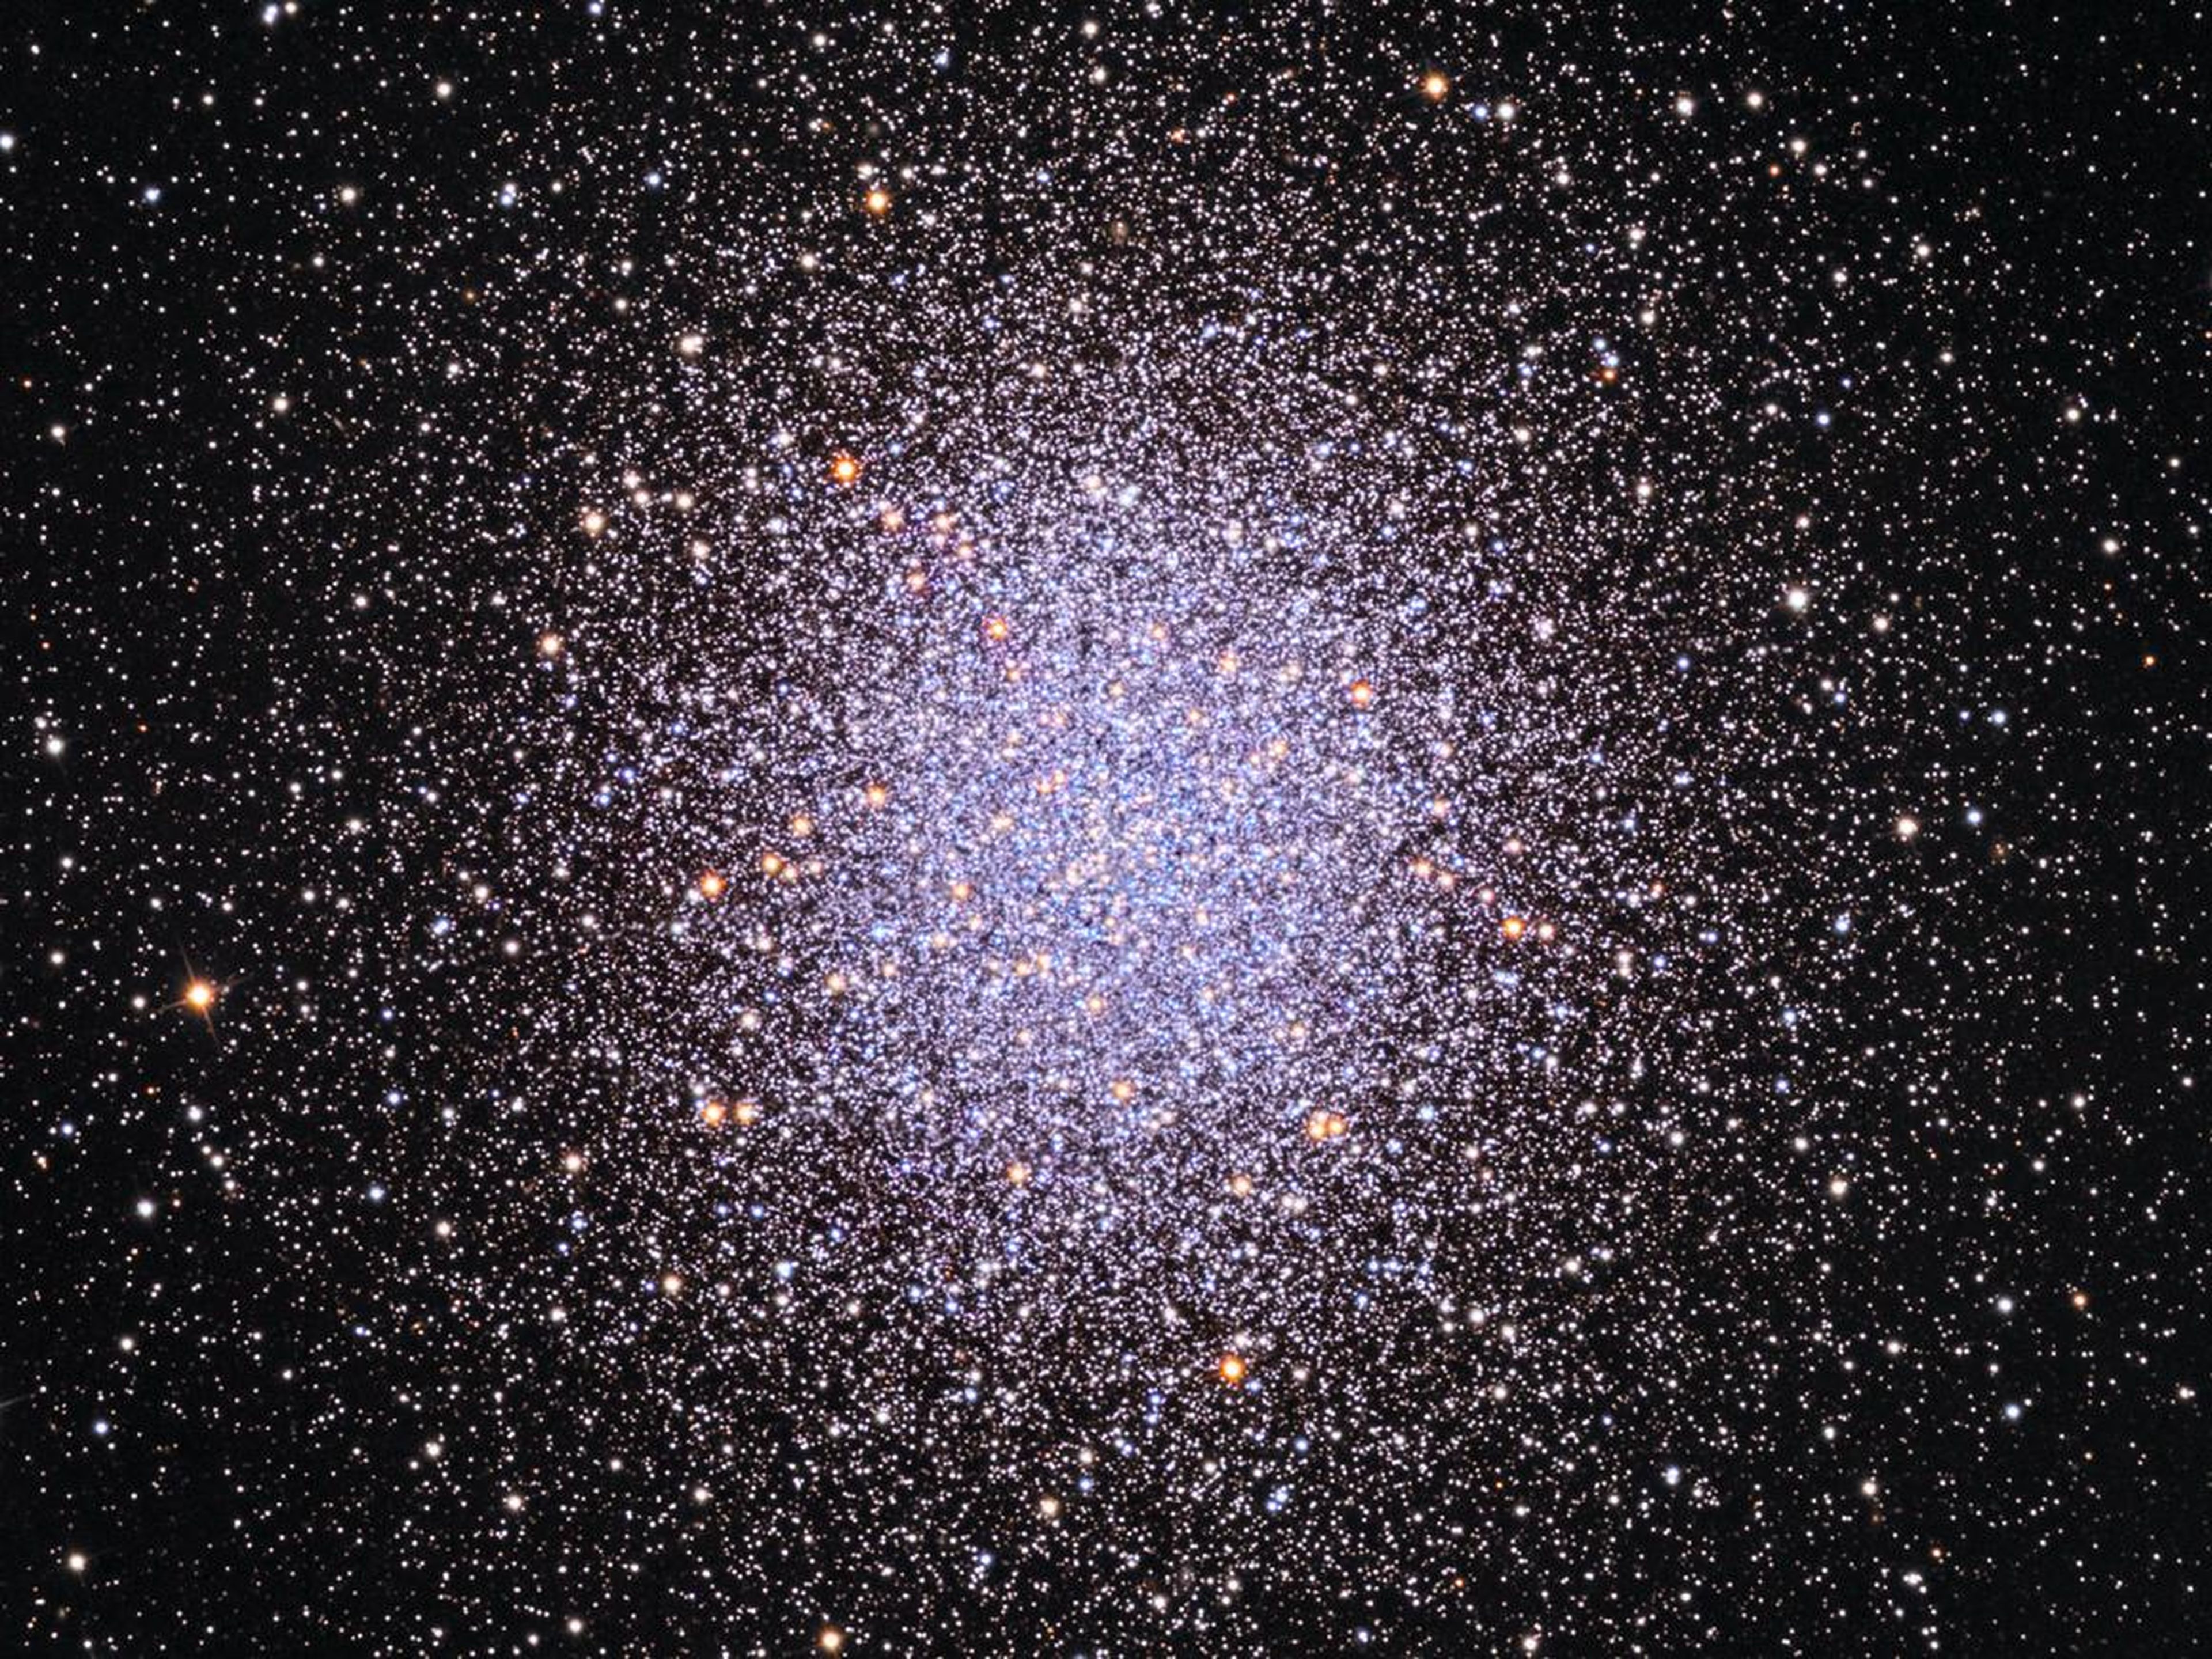 The M13 star system, as observed by the 32-inch Schulman Telescope.